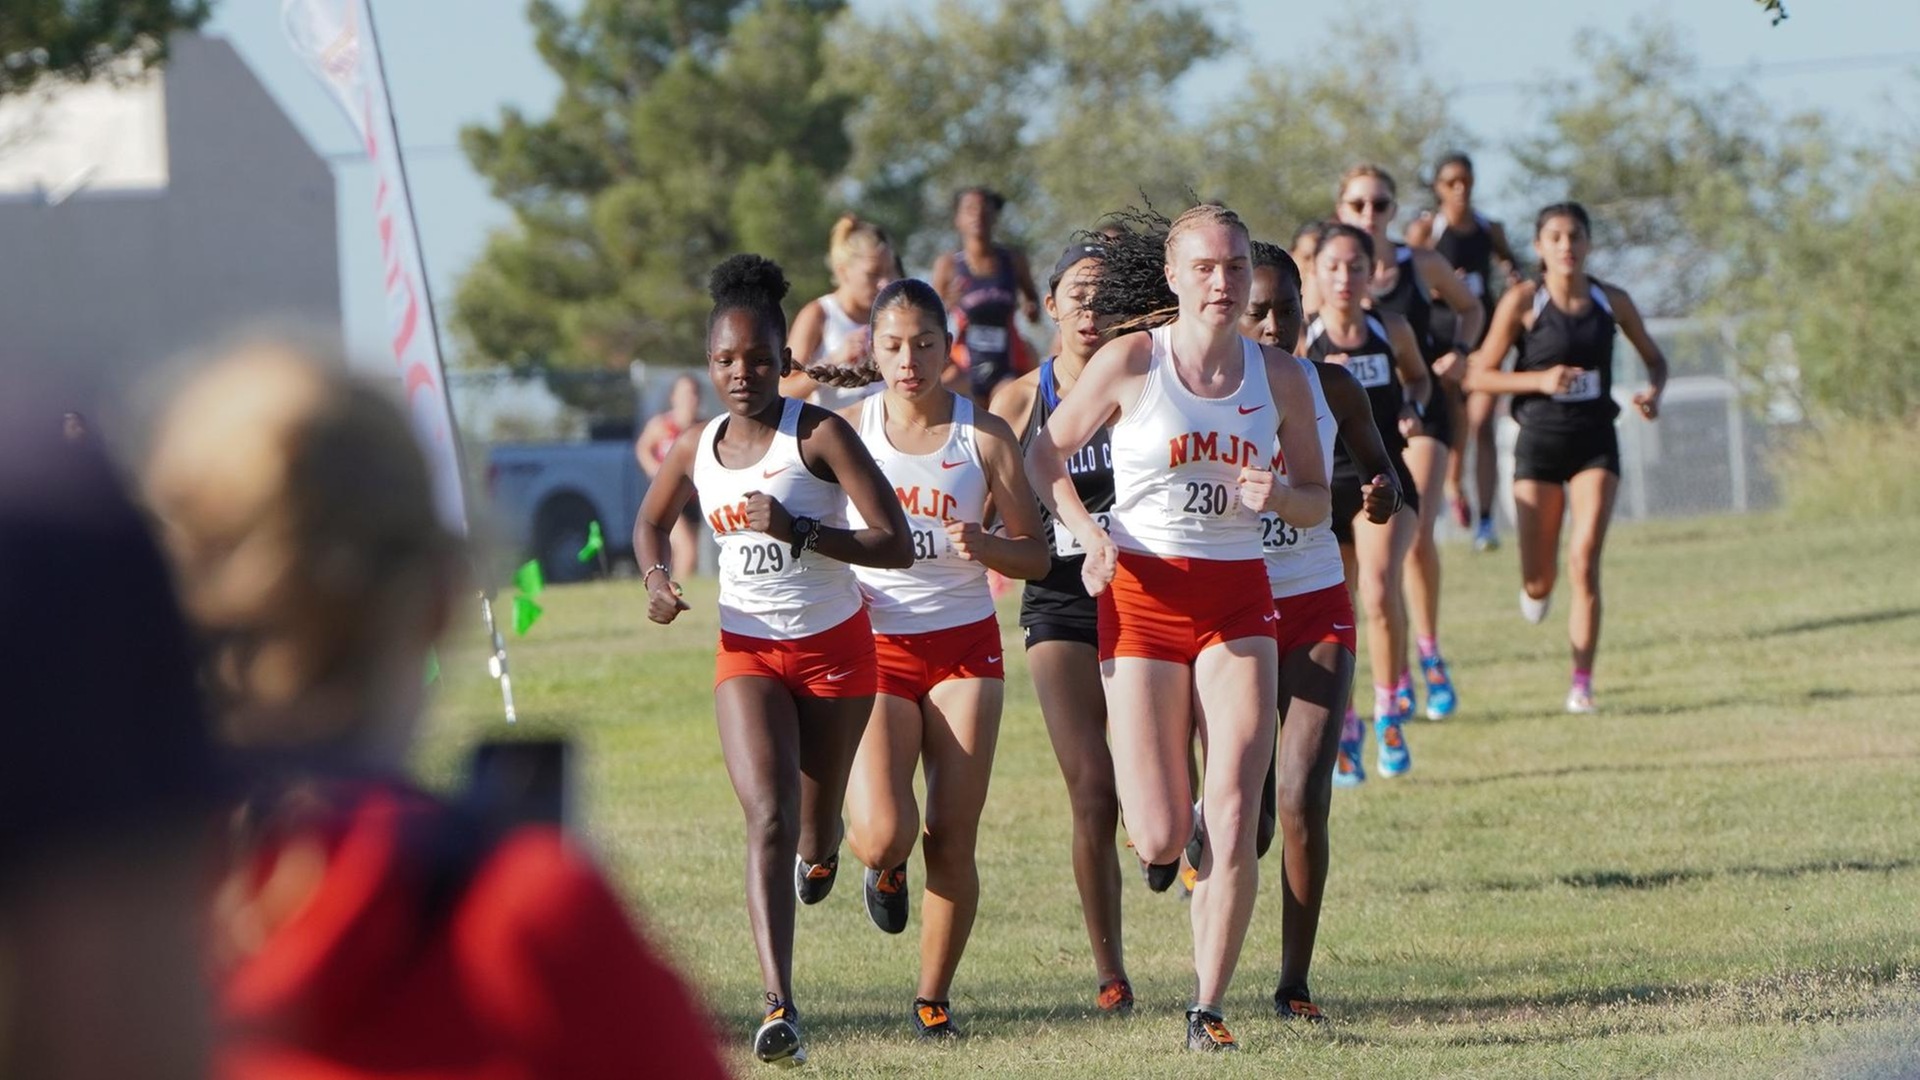 WXC Earns 4th Title, Damaris Chewon Wins for Third Time